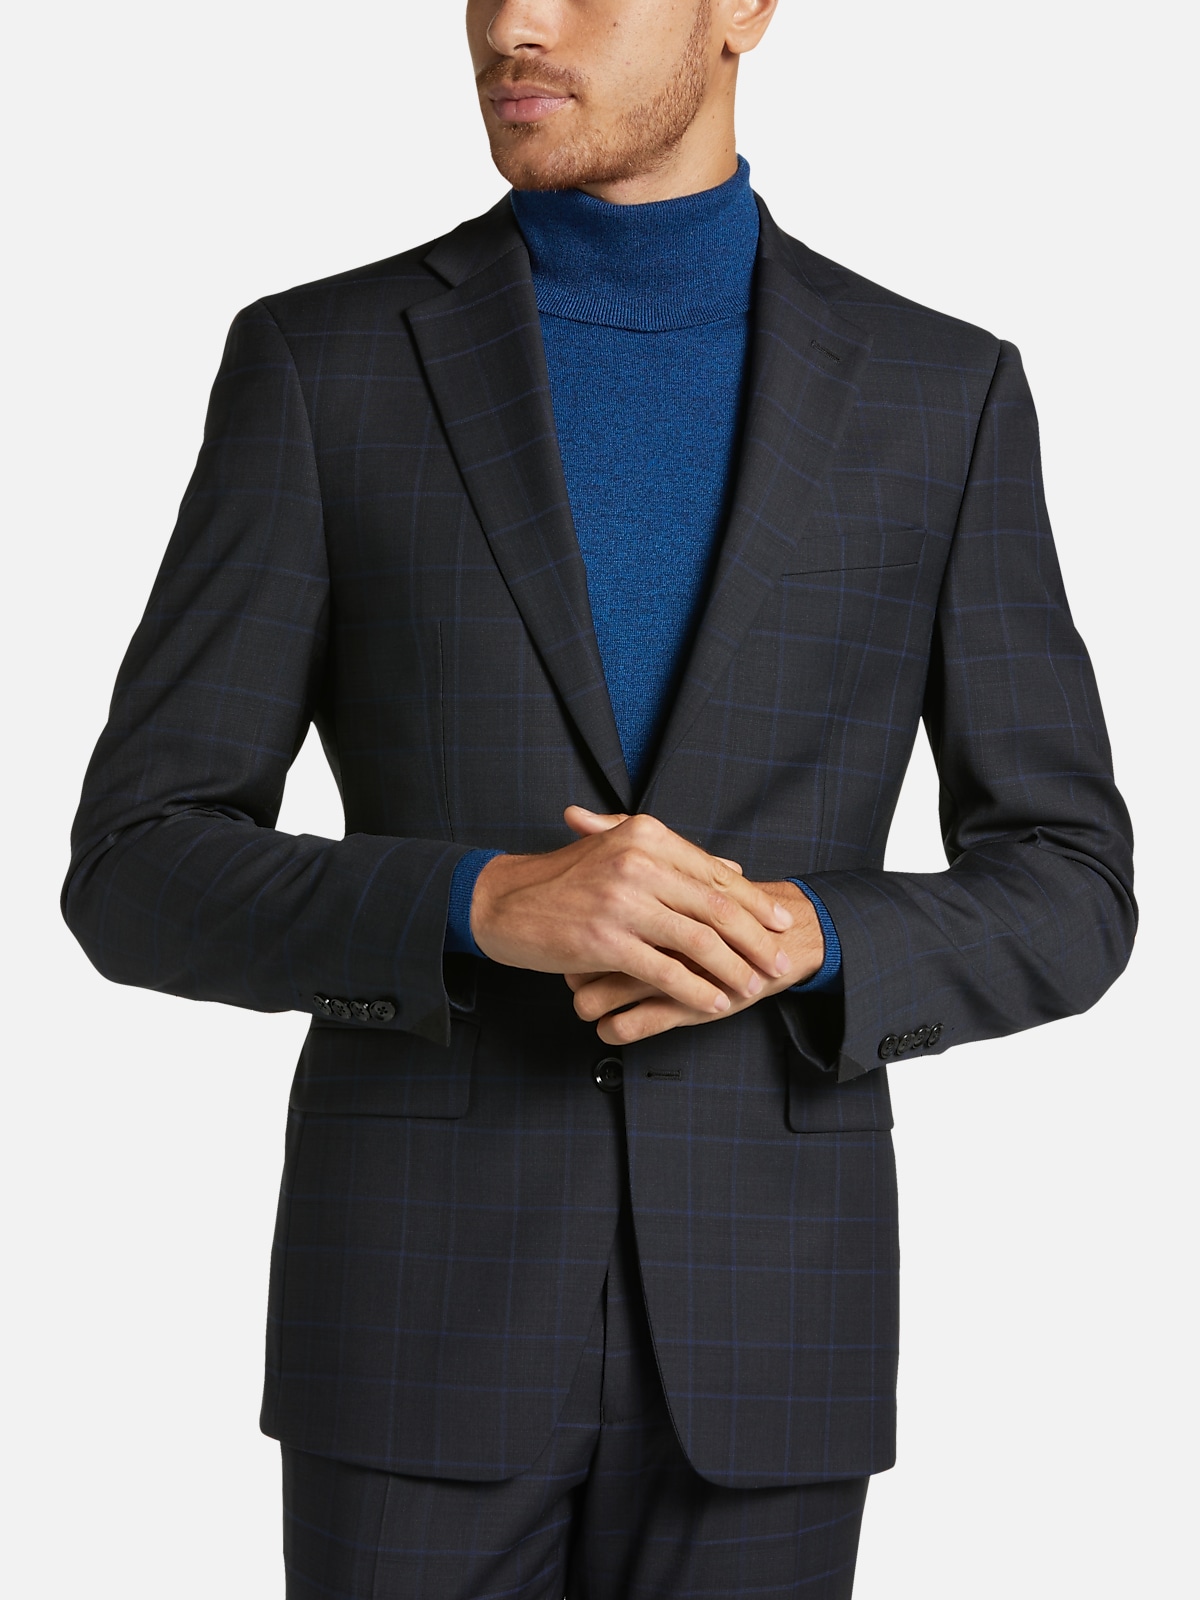 CALVIN KLEIN BLACK AND GREY HOUNDSTOOTH SUIT – Miltons - The Store